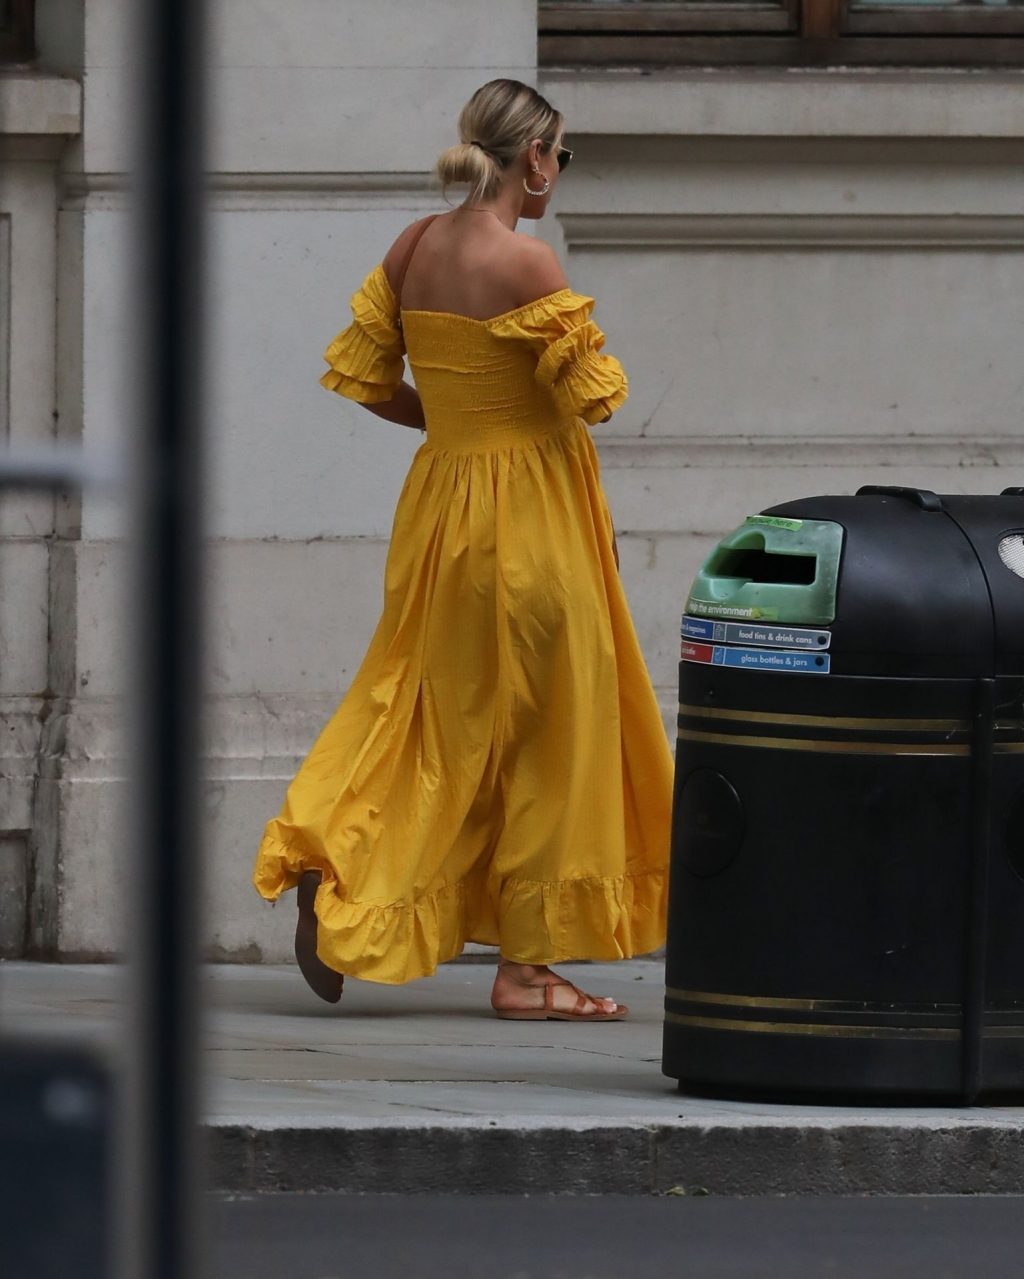 Vogue Williams Is Pictured Leaving Heart Radio Breakfast Show in a Yellow Dress (40 Photos)